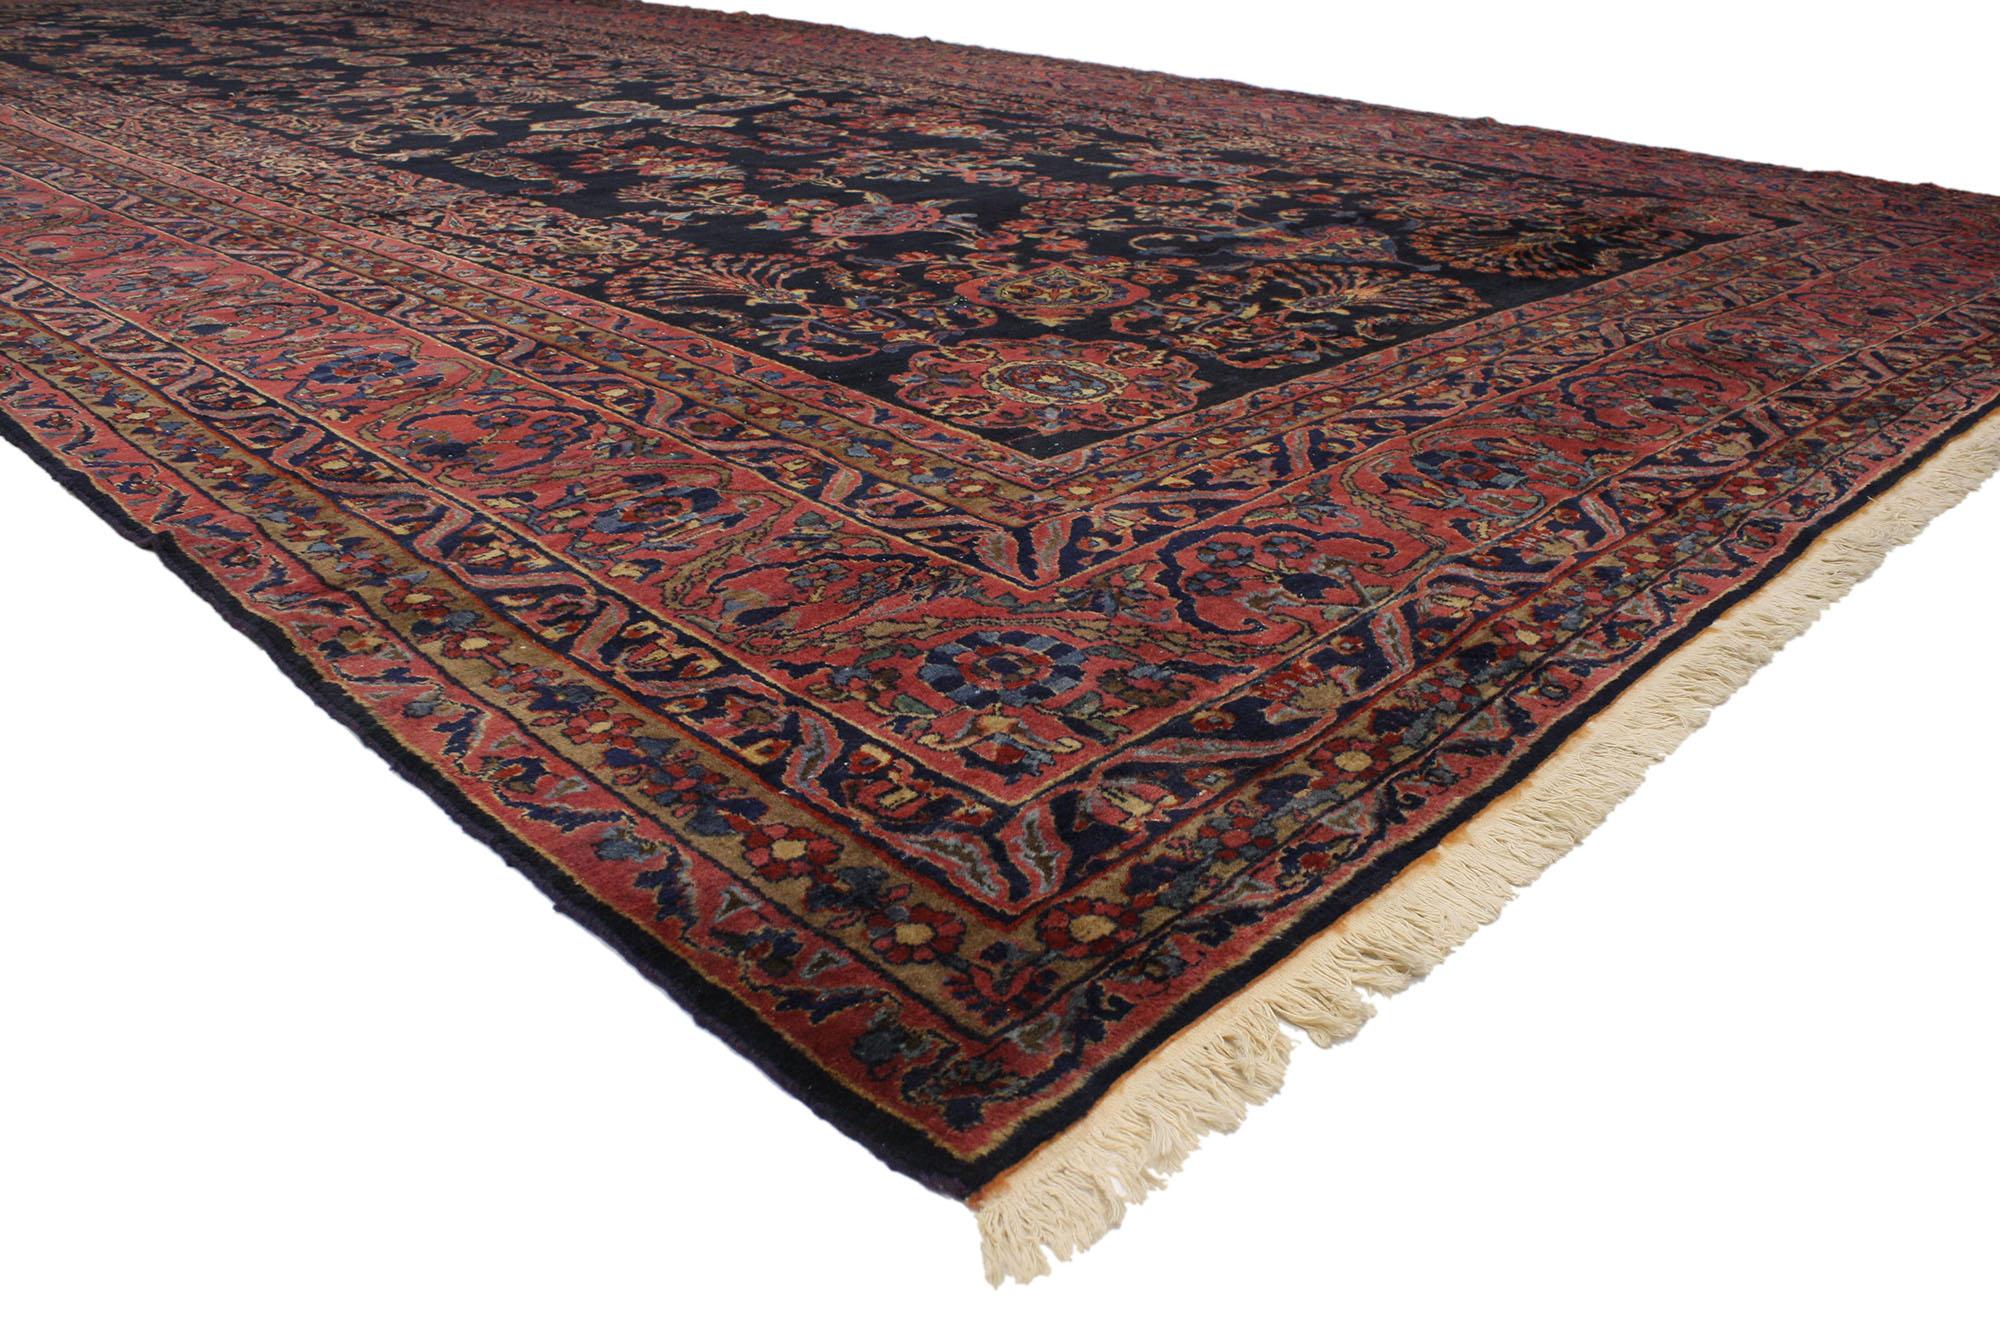 76984 Oversized Antique Persian Sarouk Rug, 12'00 x 25'00. Persian Sarouk rugs, also known as Saruk or Sarough rugs, are a type of Persian rug originating from the Sarouk region of Iran. These rugs are meticulously handcrafted in the village of